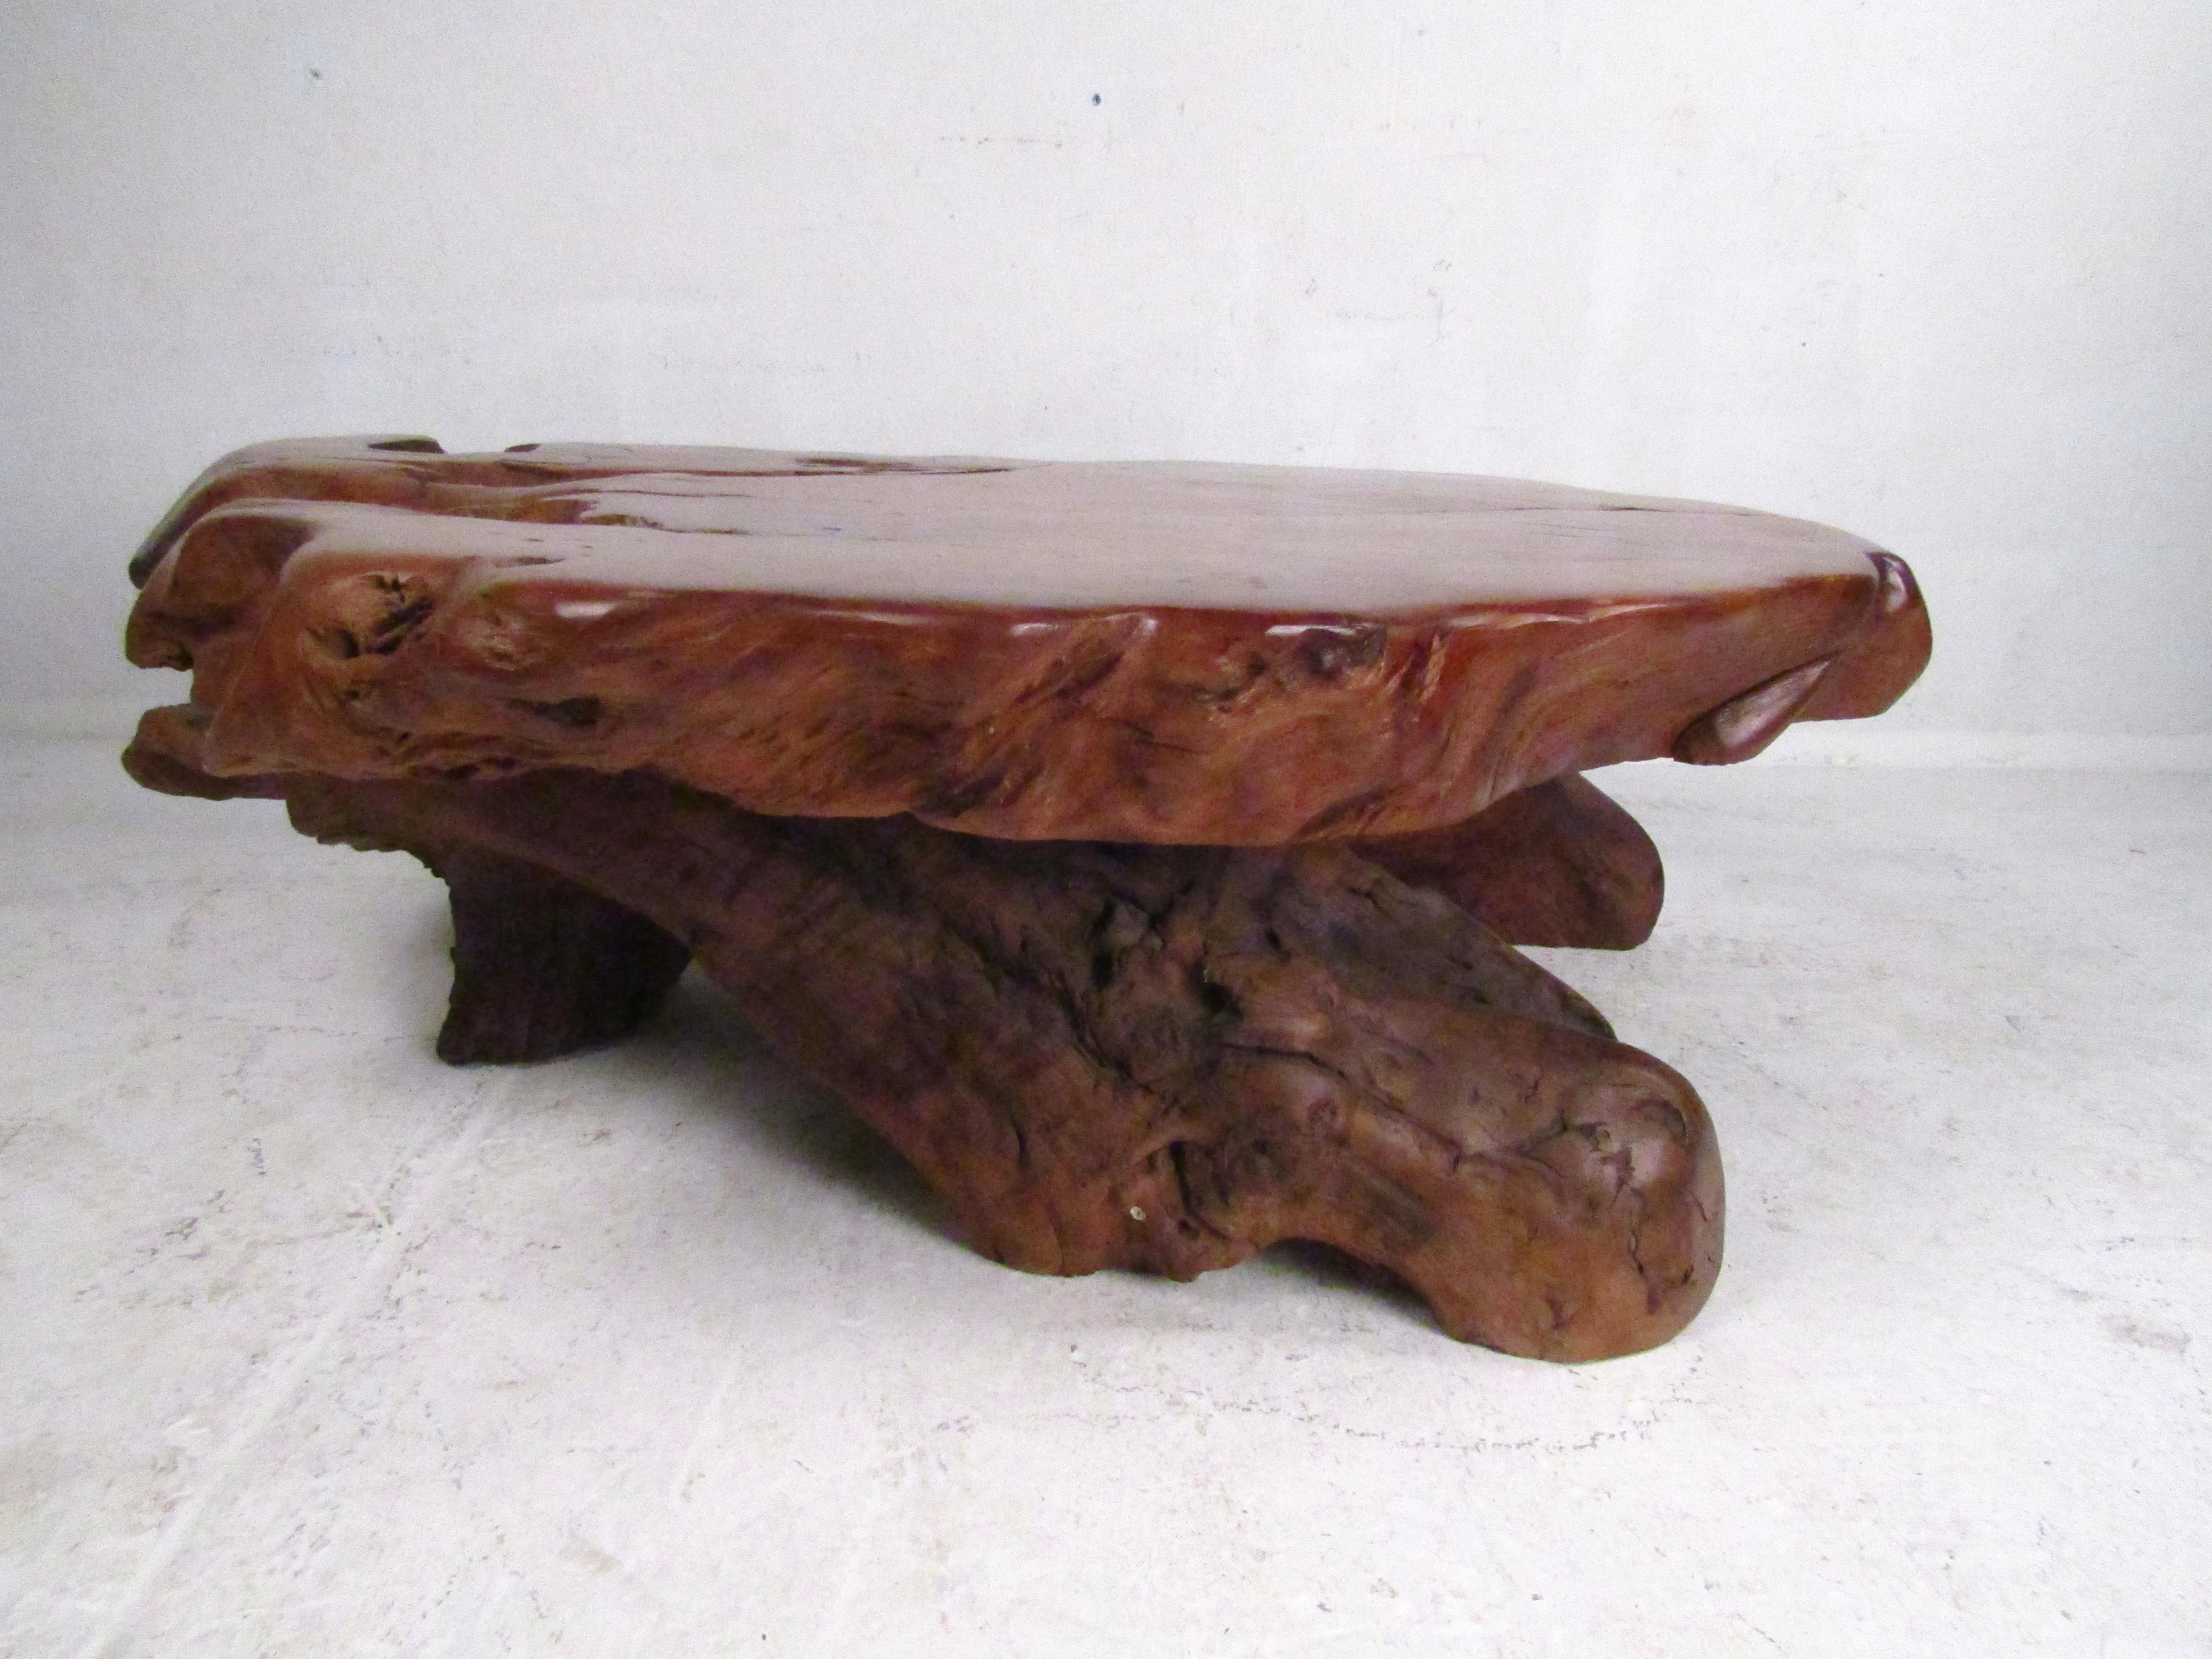 Stunning live-edge coffee or cocktail table. A sizeable slab serves as the tabletop. Interesting addition to any modern interior. Please confirm item location with dealer (NJ or NY).